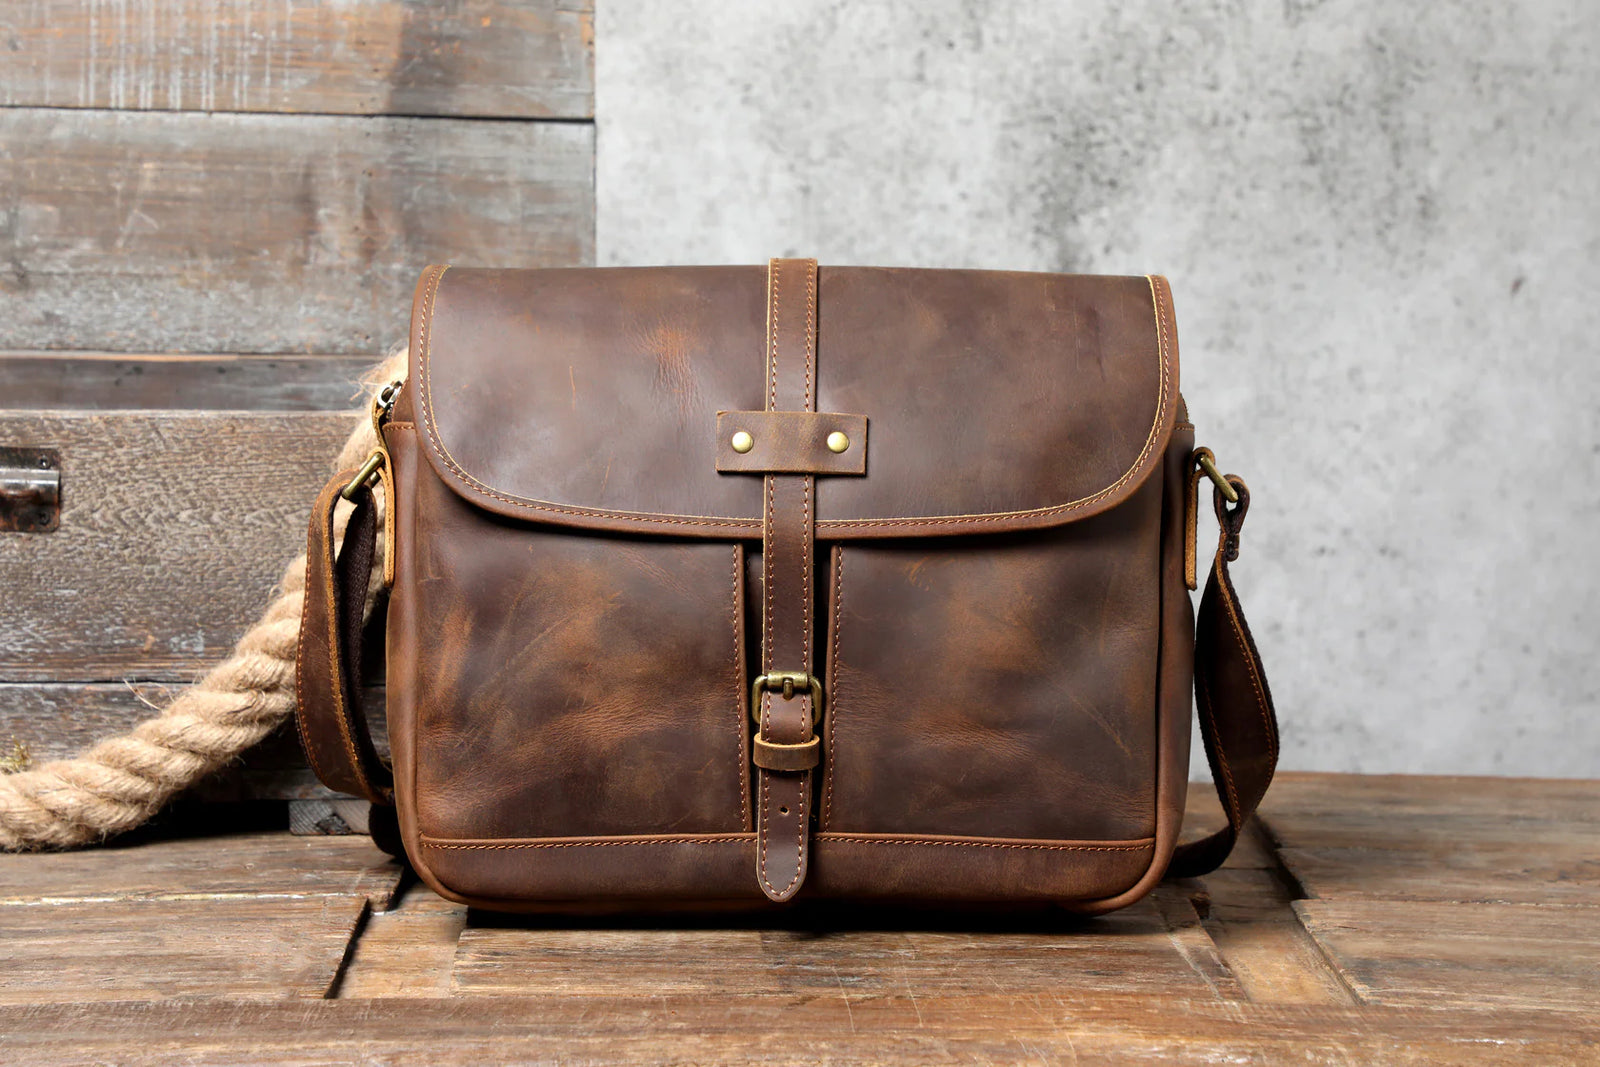 Satchel vs. Messenger Bag - What's The Difference?